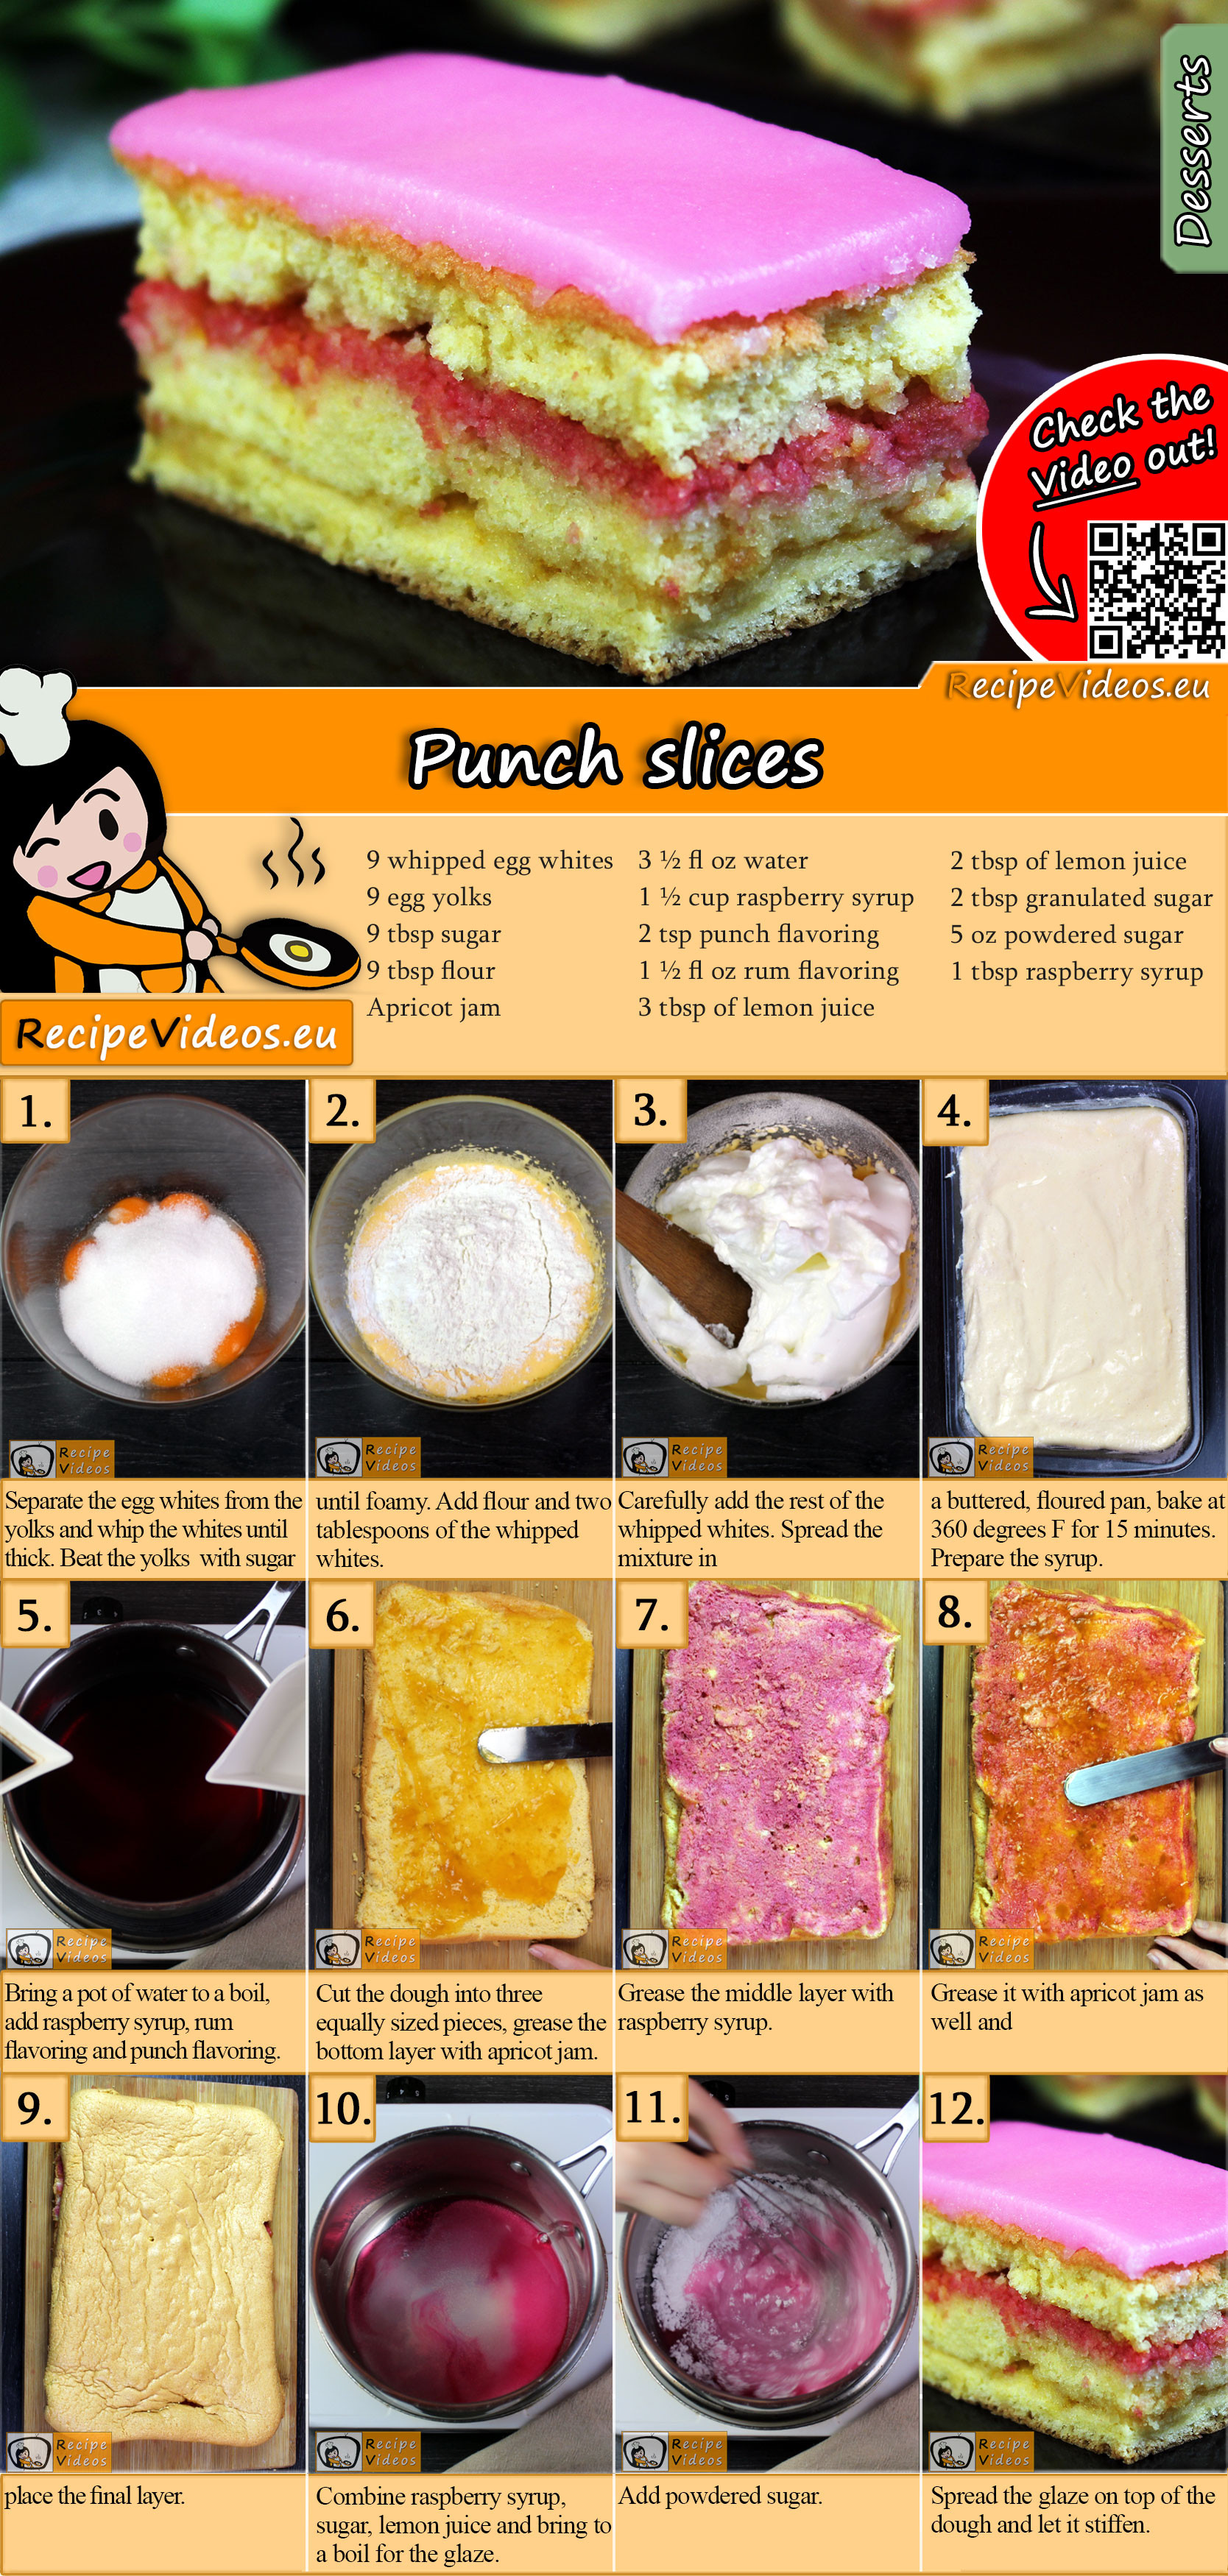 Punch slices recipe with video